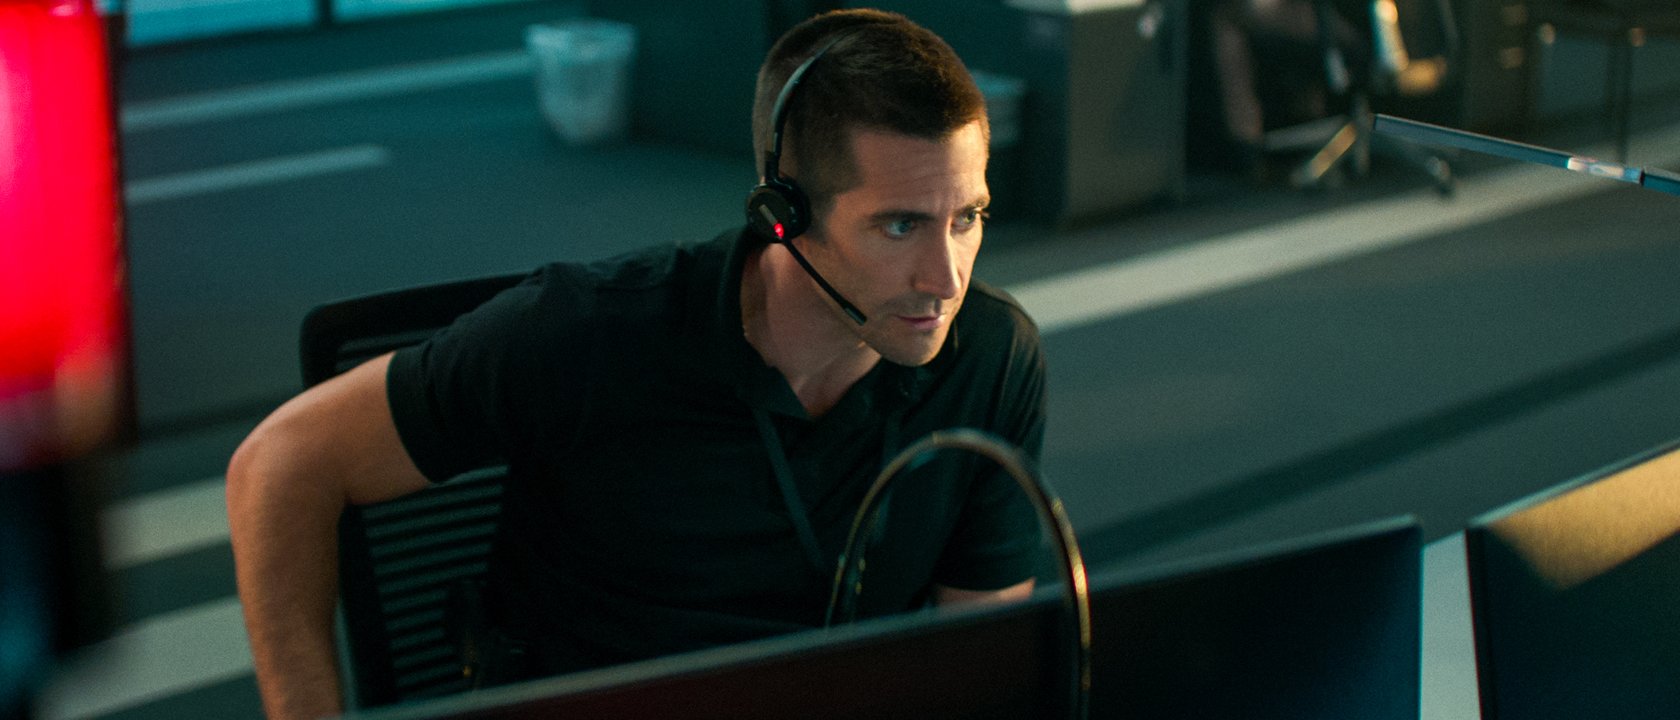 Netflix’s The Guilty Review: Jake Gyllenhaal, Jake Gyllenhaal, Jake Gyllenhaal, Jake Gyllenhaal